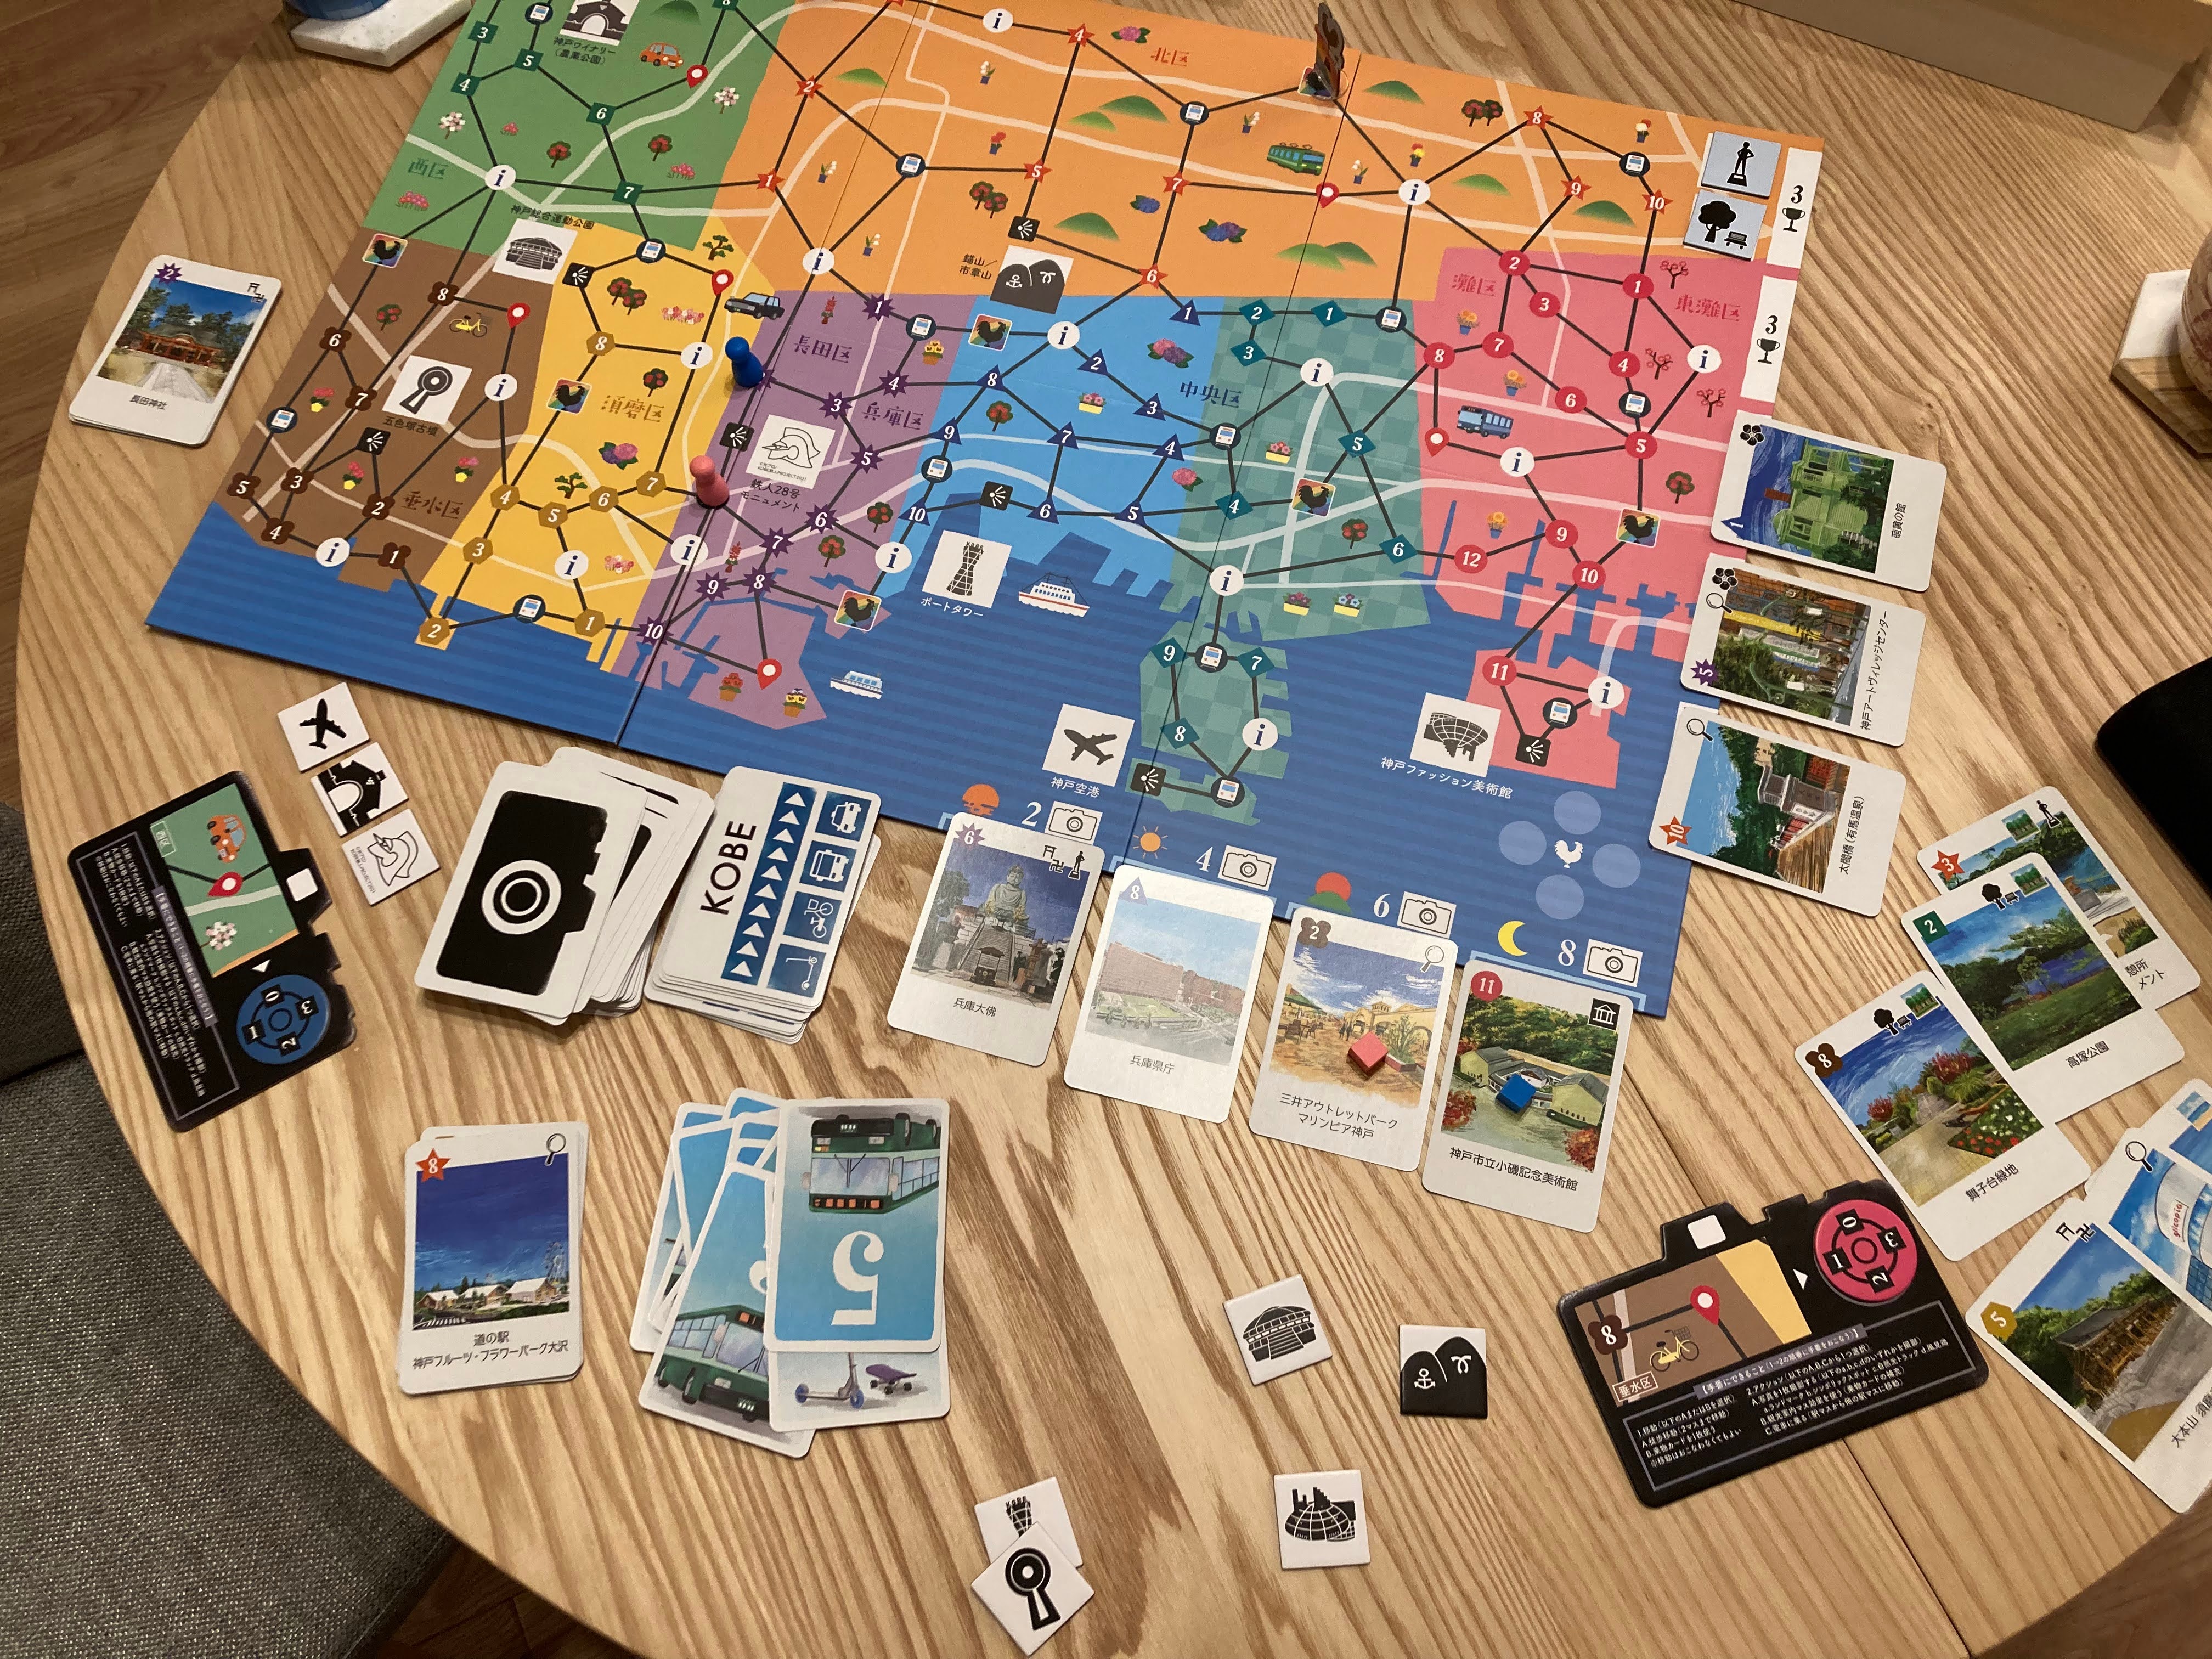 Board game "Zoom in Kyoto" laid out on the table